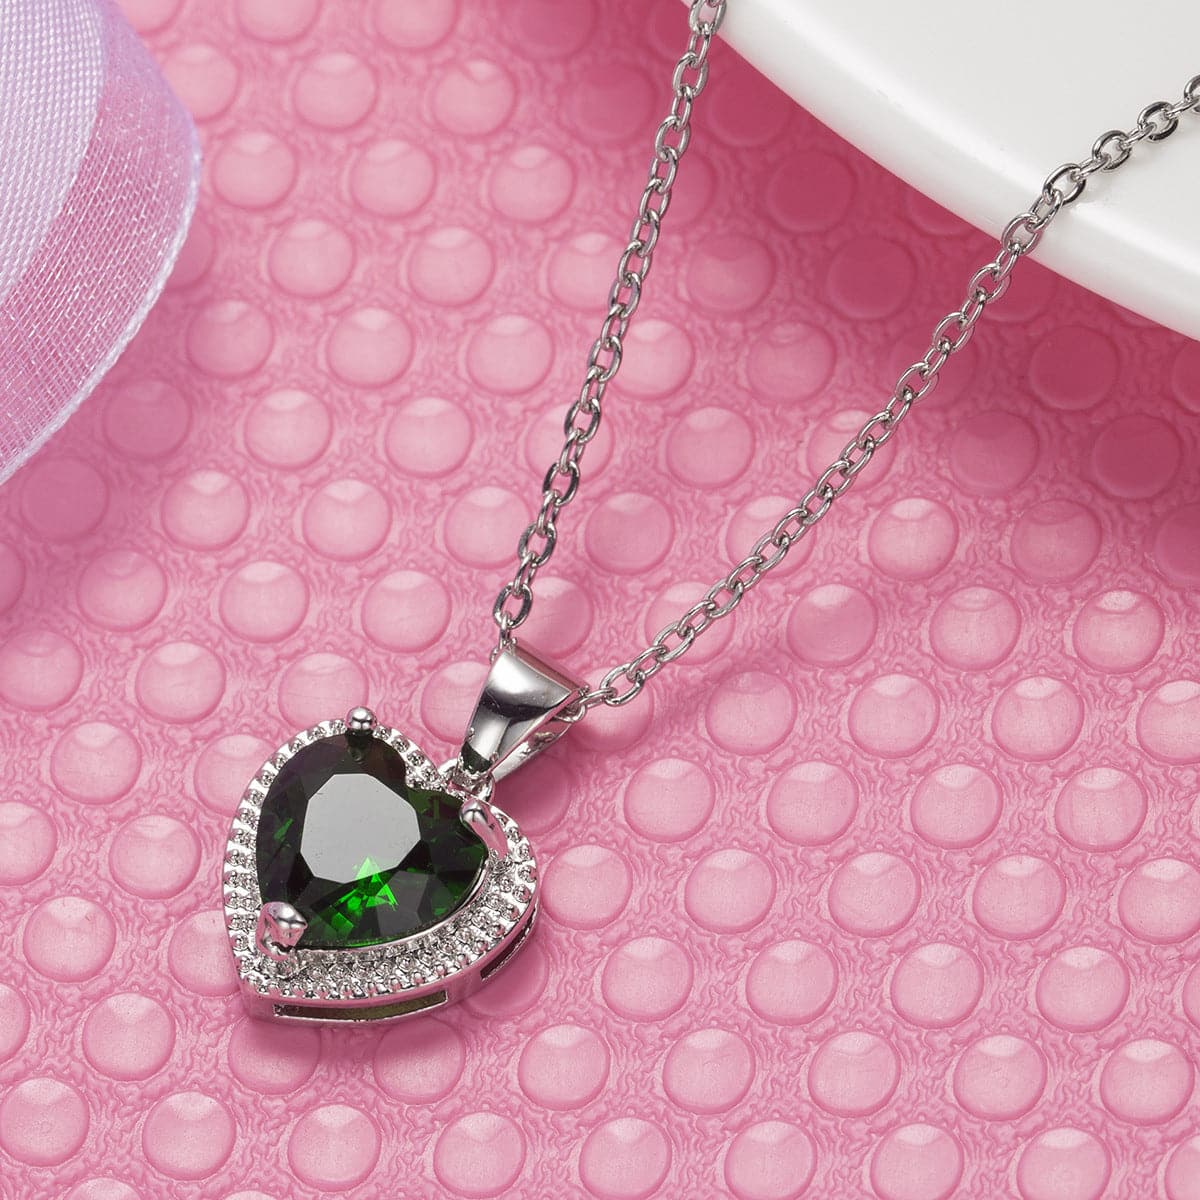 Green Crystal & Silver-Plated Heart Pendant Necklace